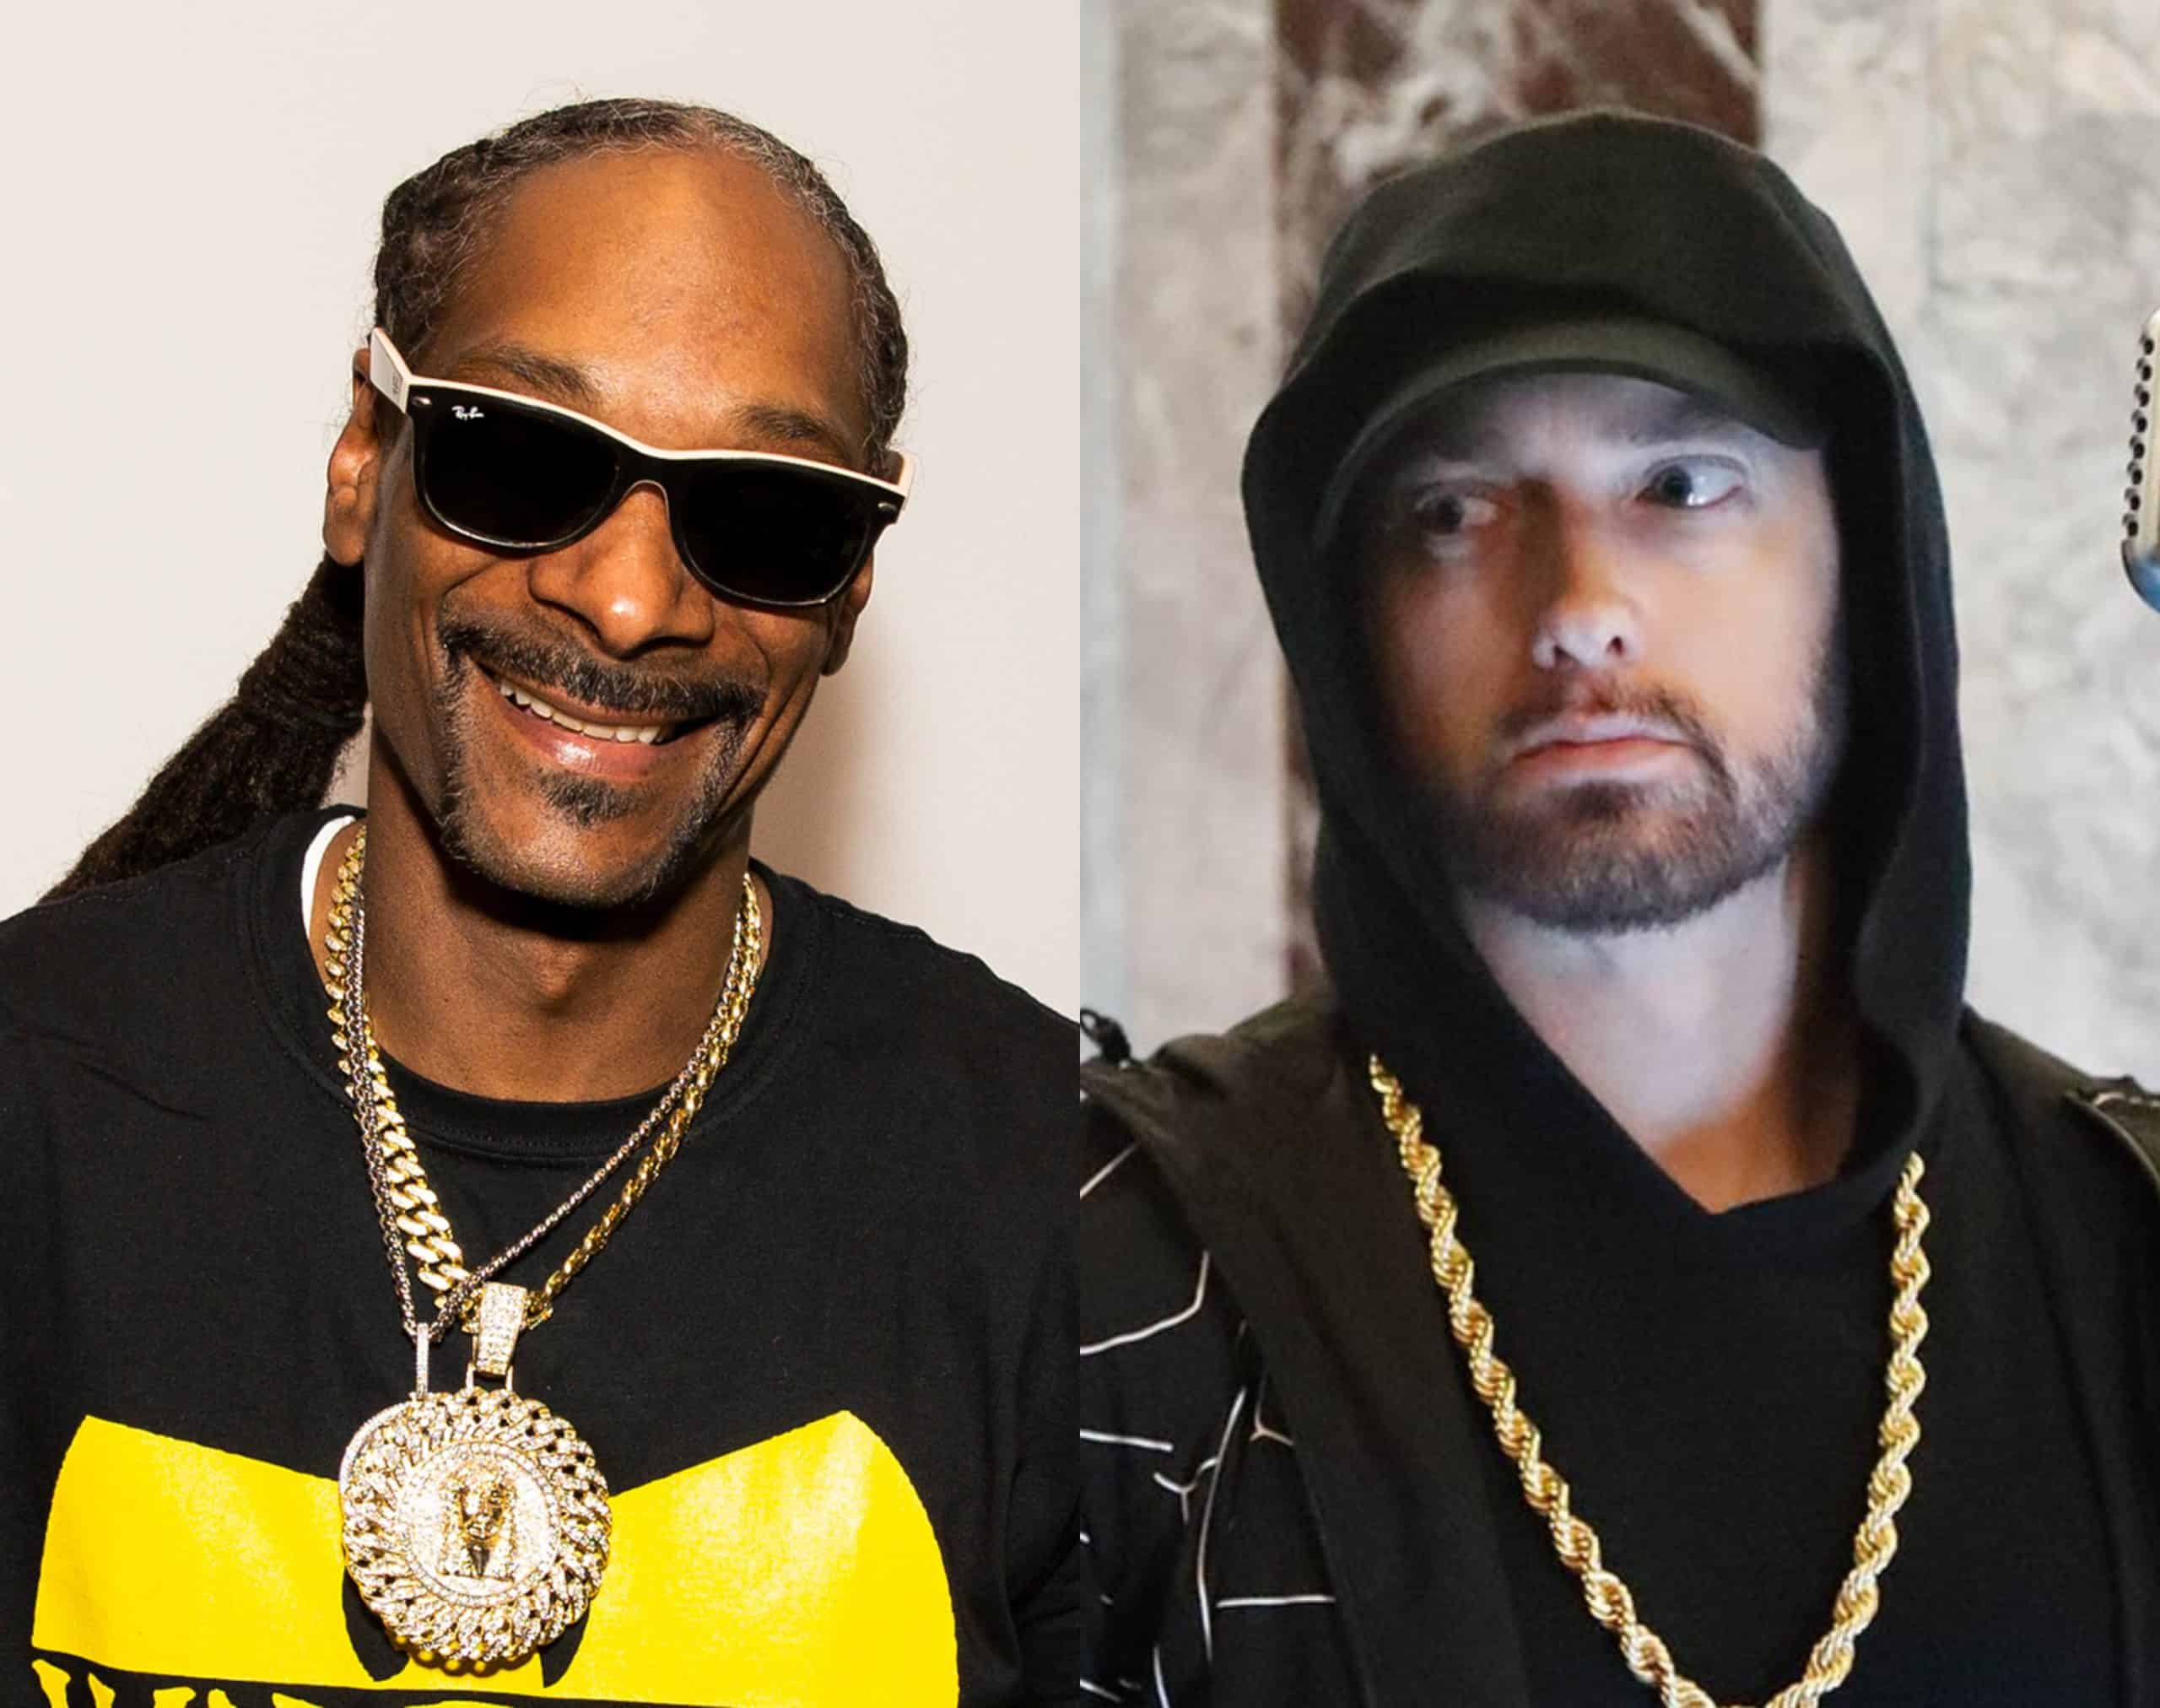 A New Eminem and Snoop Dogg Collaboration is Coming Soon